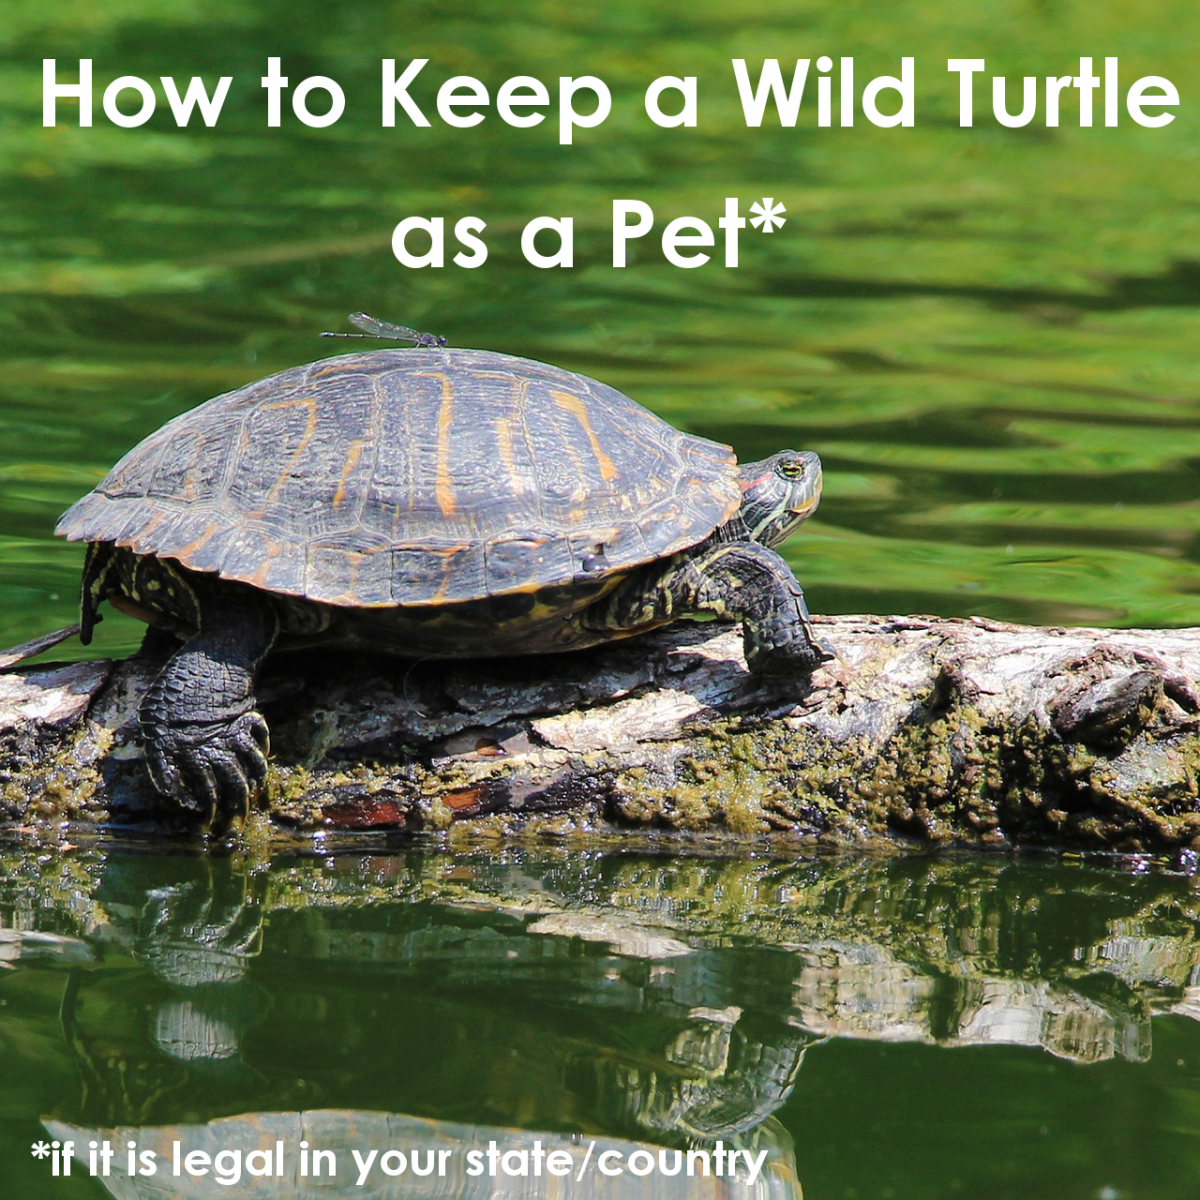 How To Keep A Wild Turtle As A Pet Pethelpful By Fellow Animal Lovers And Experts,Artichoke Plant